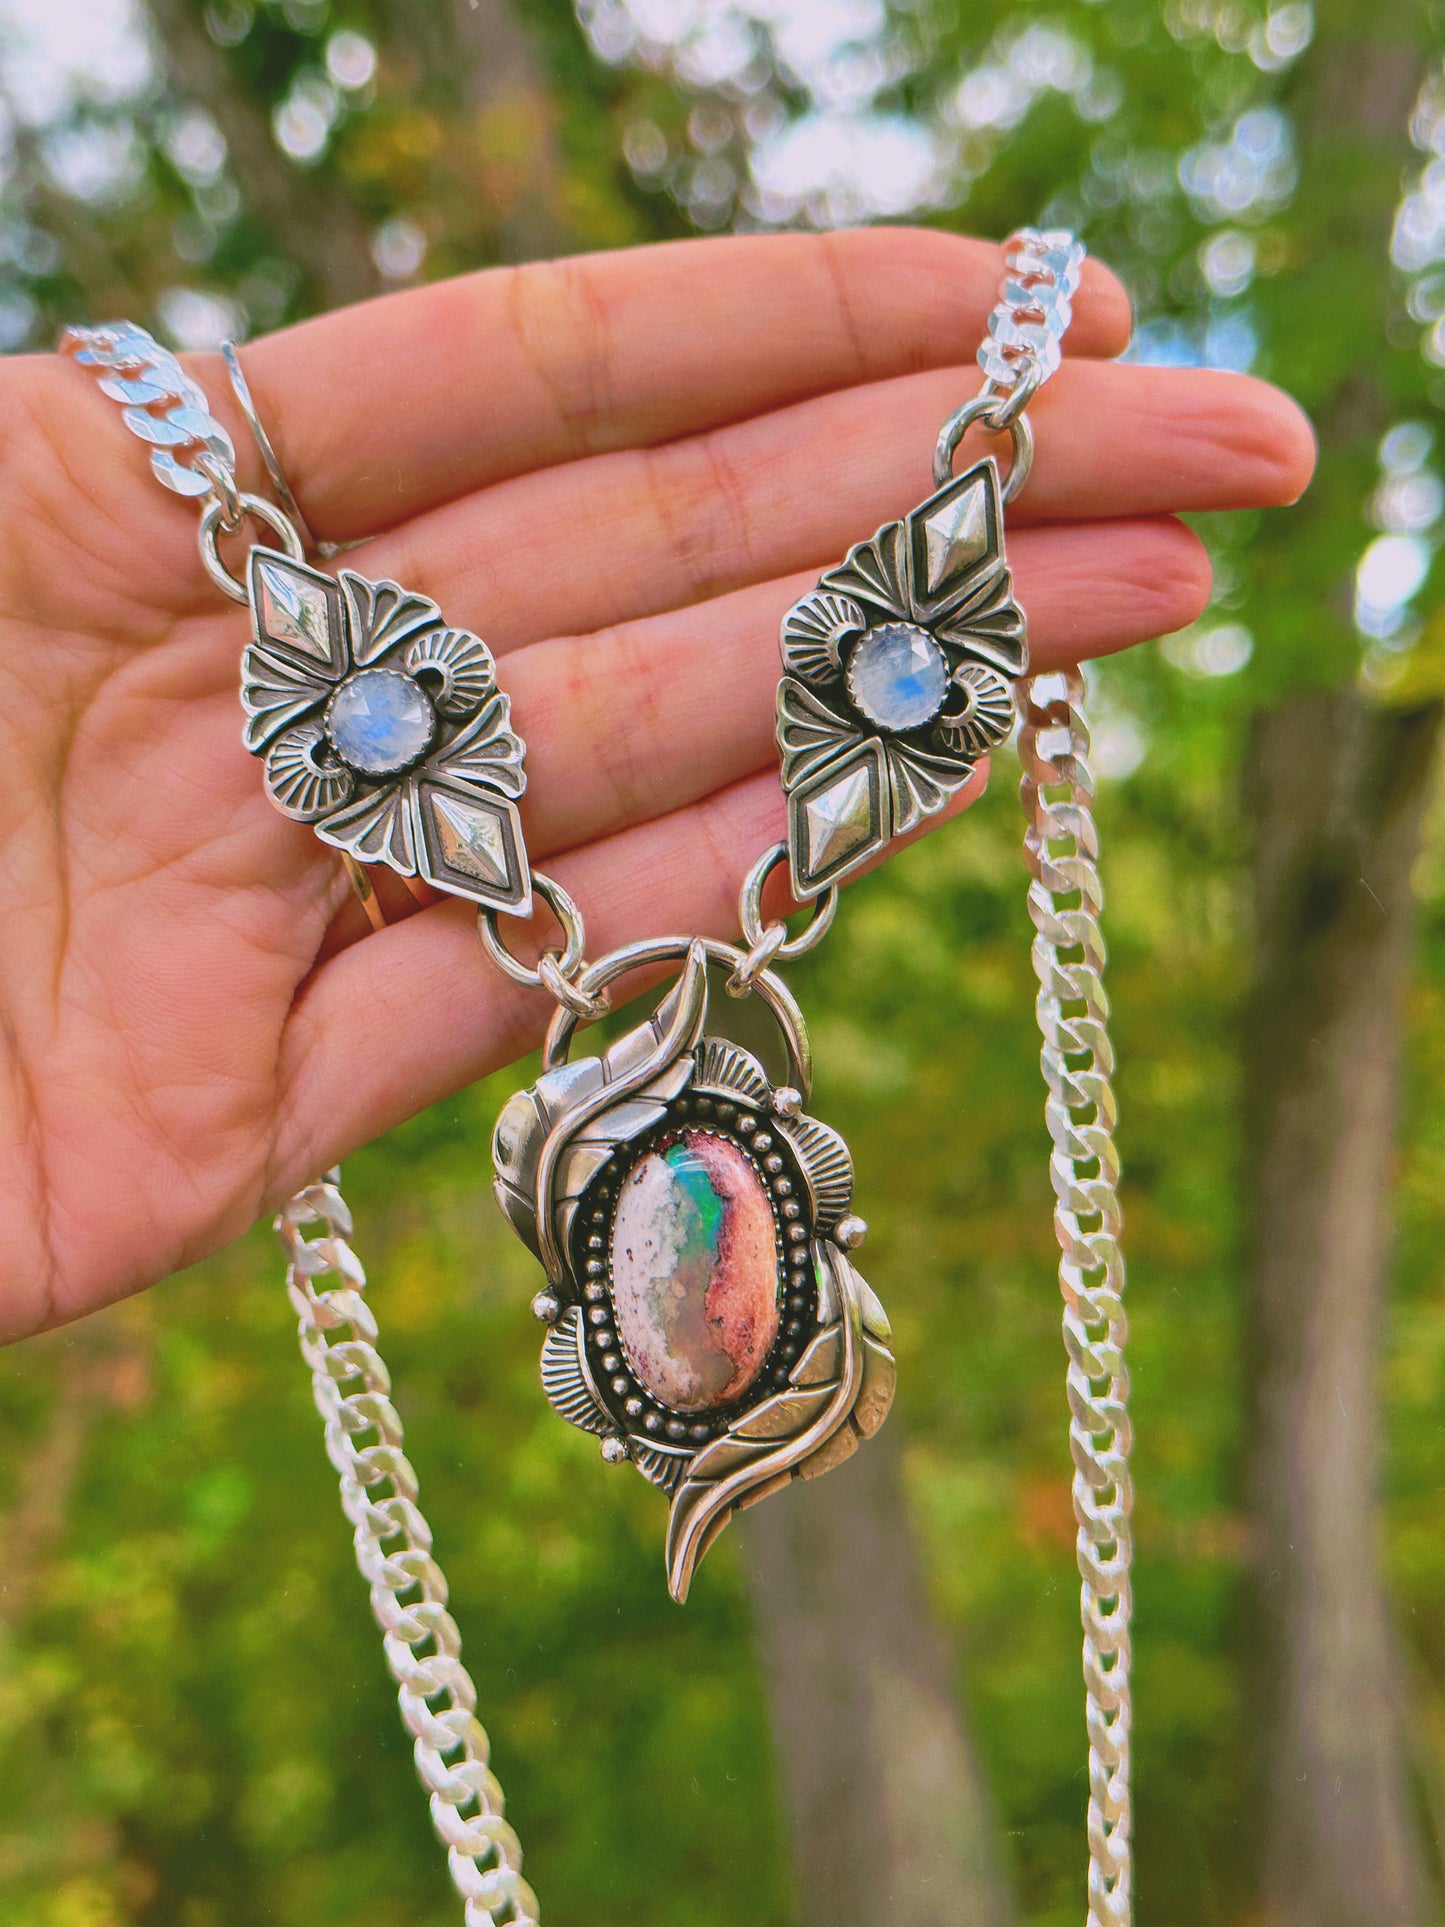 One of Kind Botanical Necklace with Rainbow Moonstone and Stunning Opal